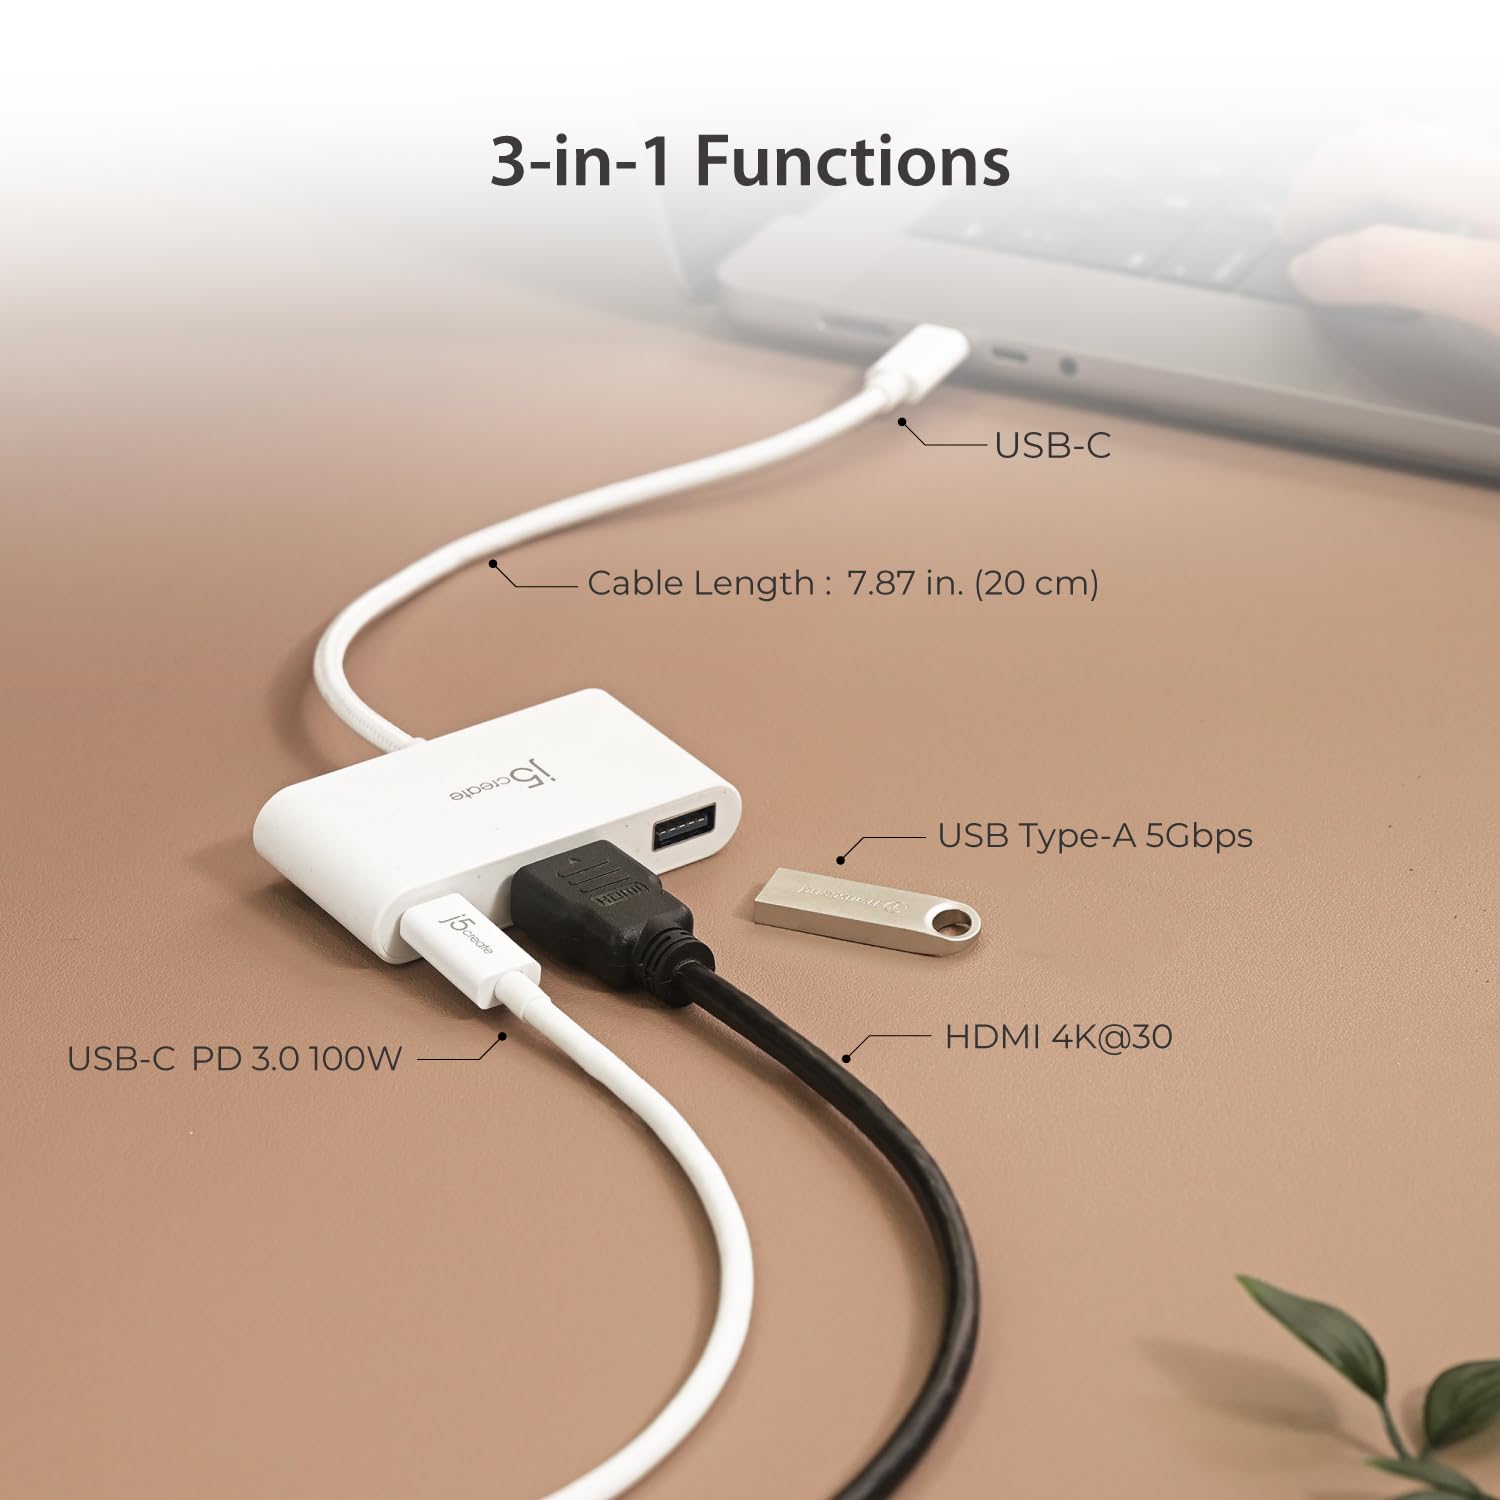 j5create USB-C to HDMI & USB Type-A with Power Delivery(Eco-Friendly) with 4K HDMI, USB-A 5Gbps, PD 100W Charging | Compatible with MacBook Pro,Chromebook,HP, Samsung and more Type-C Devices(JCA379EW)